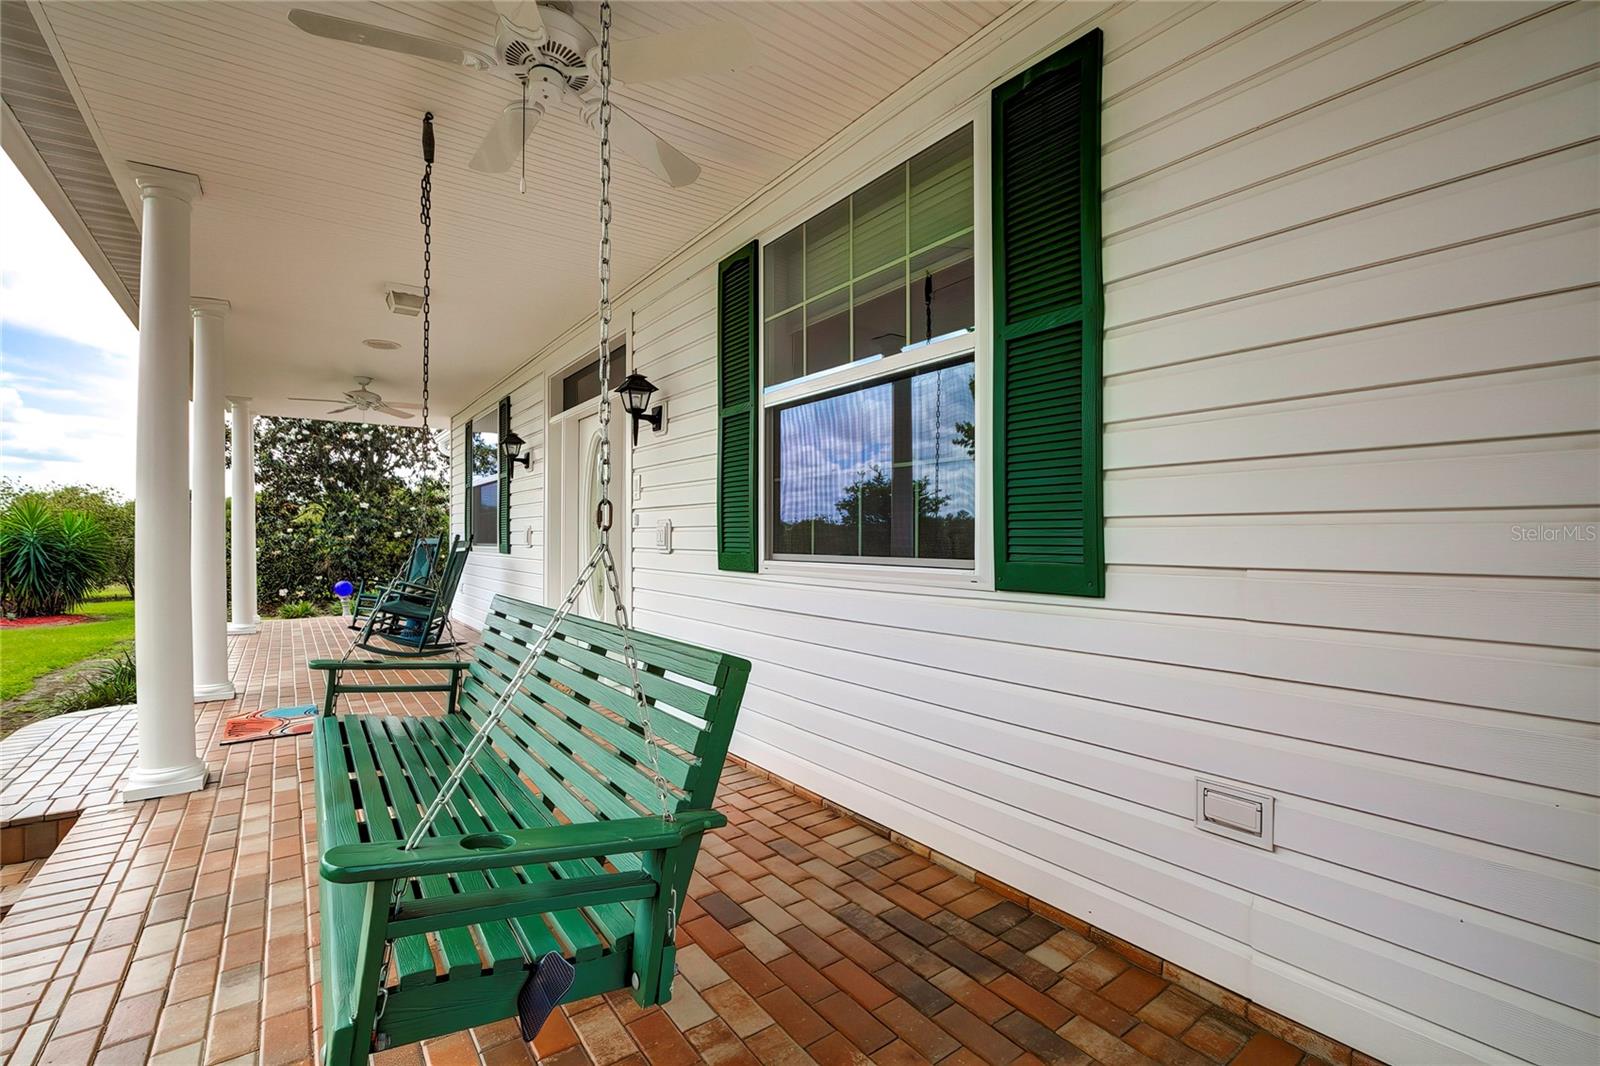 Rocking Chair Front Porch Adorned with Brick Pavers